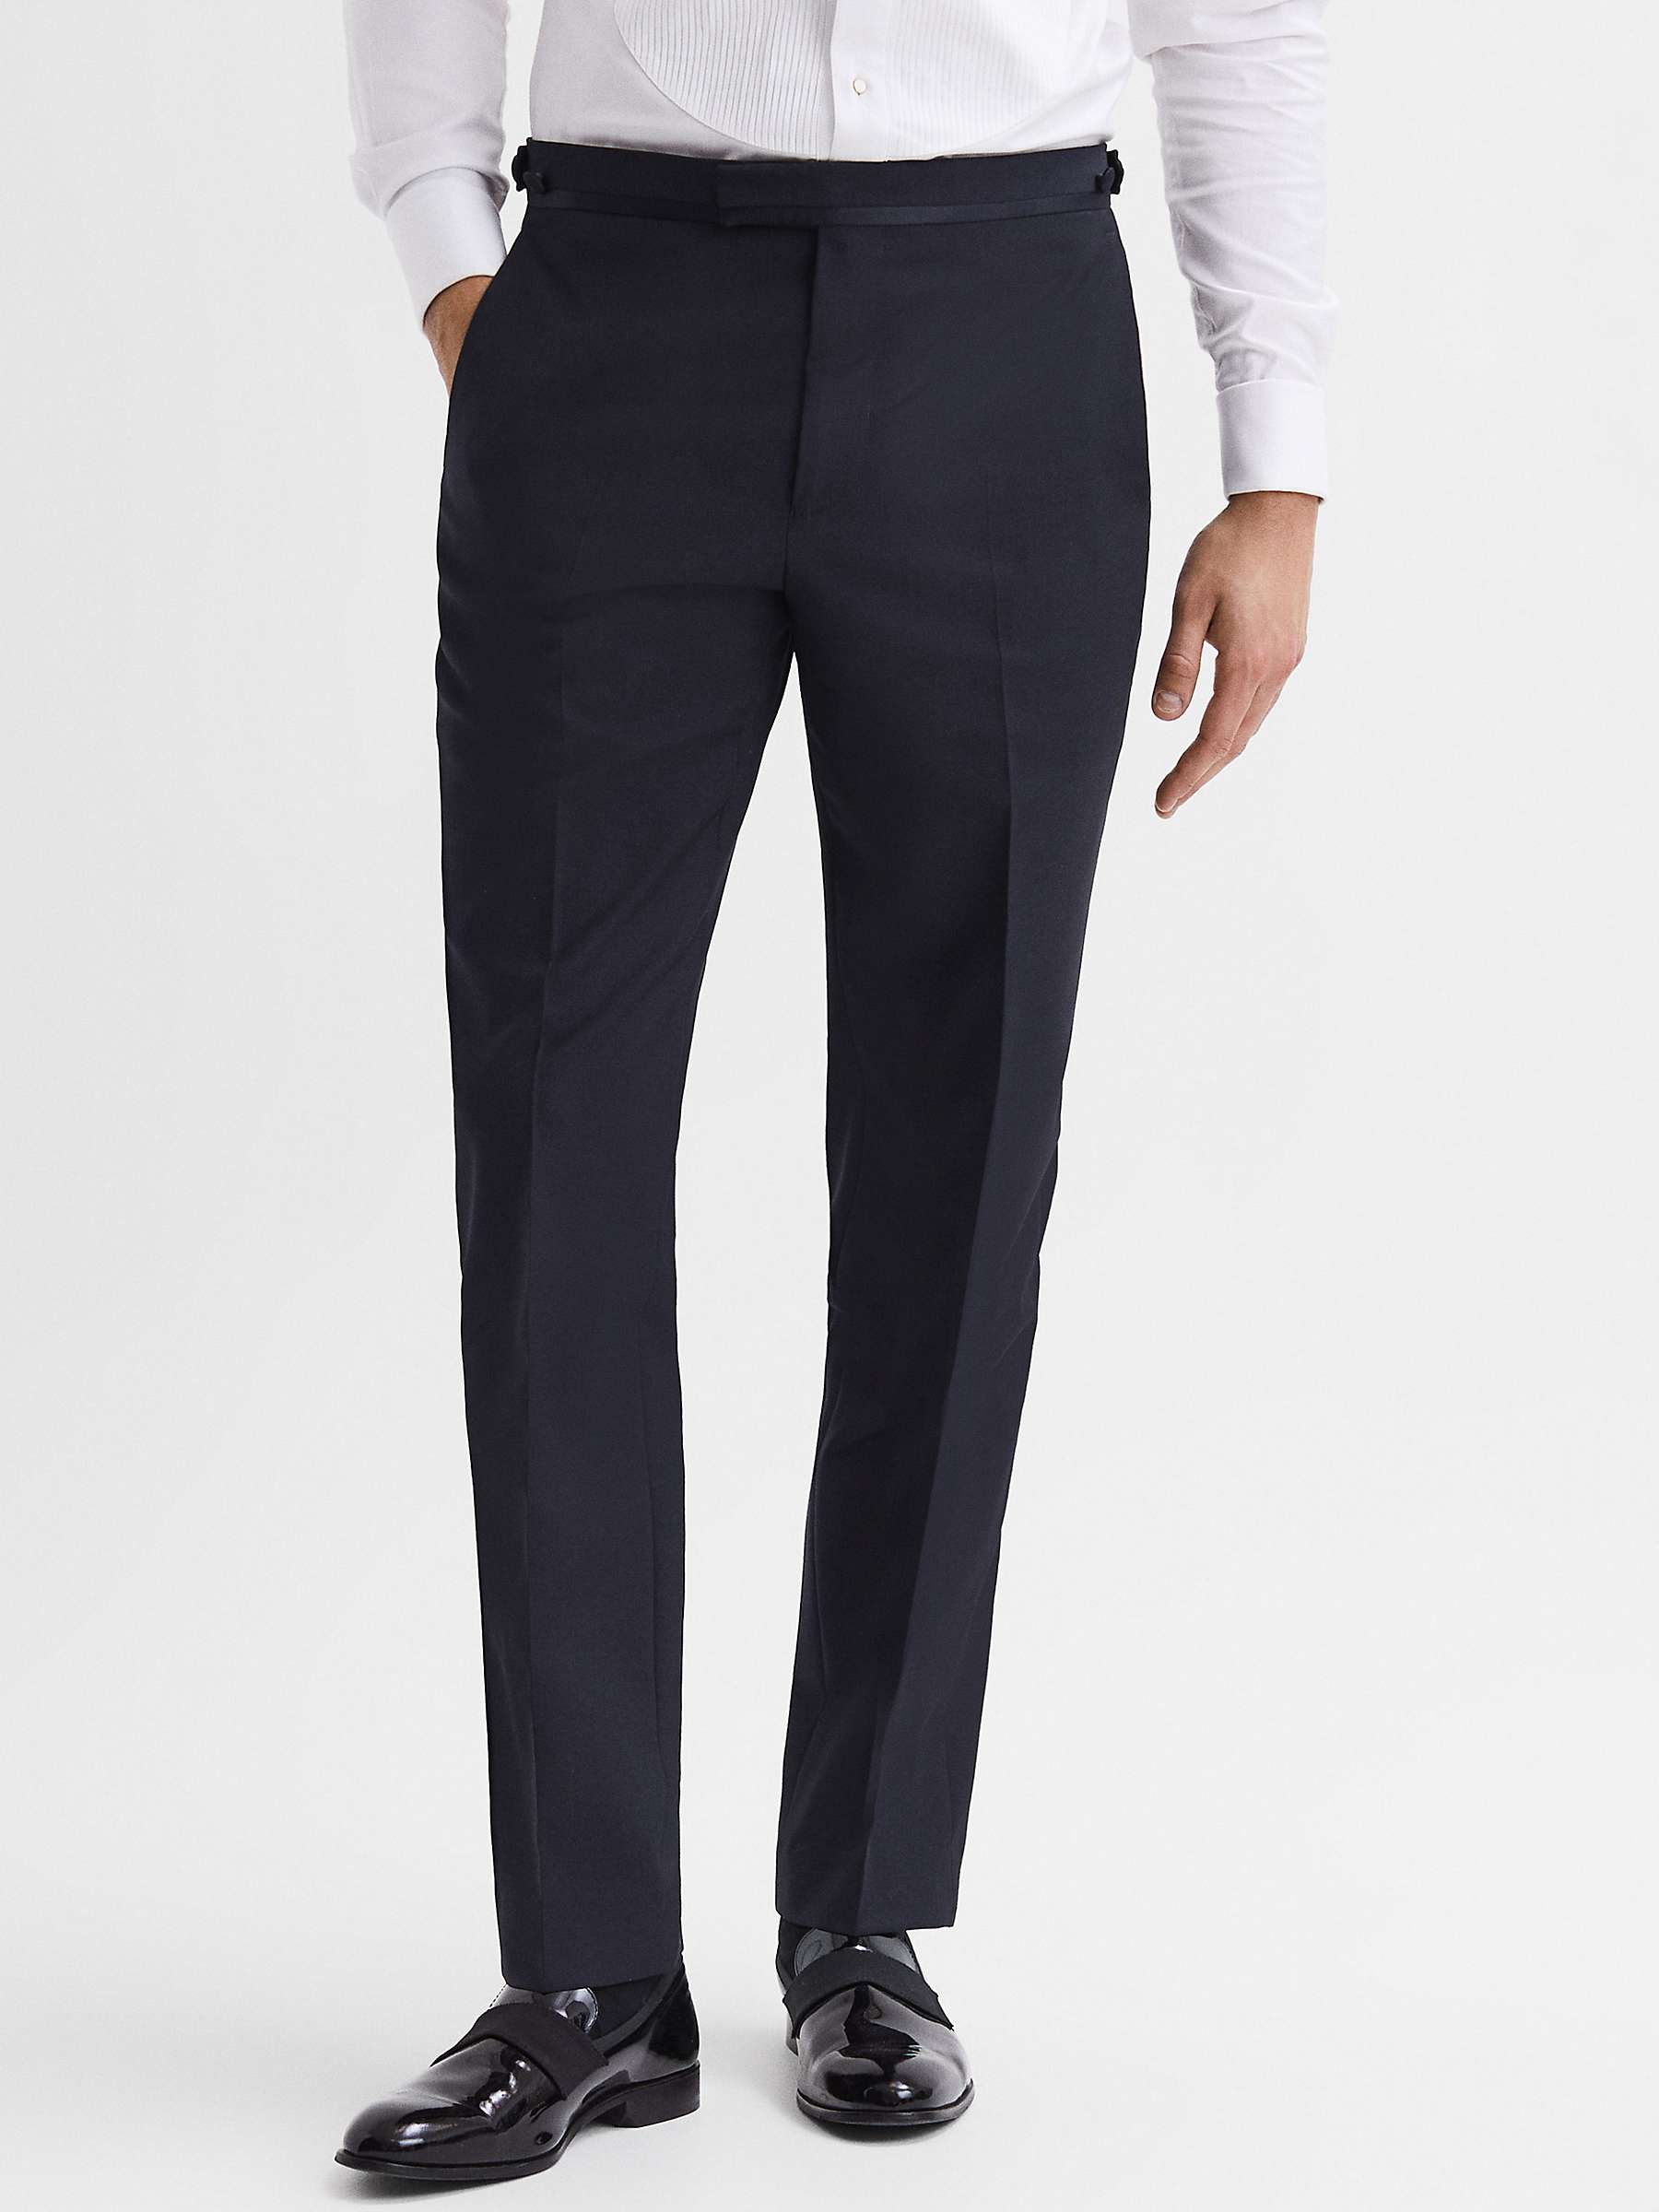 Reiss Poker Wool Blend Suit Trousers at John Lewis & Partners